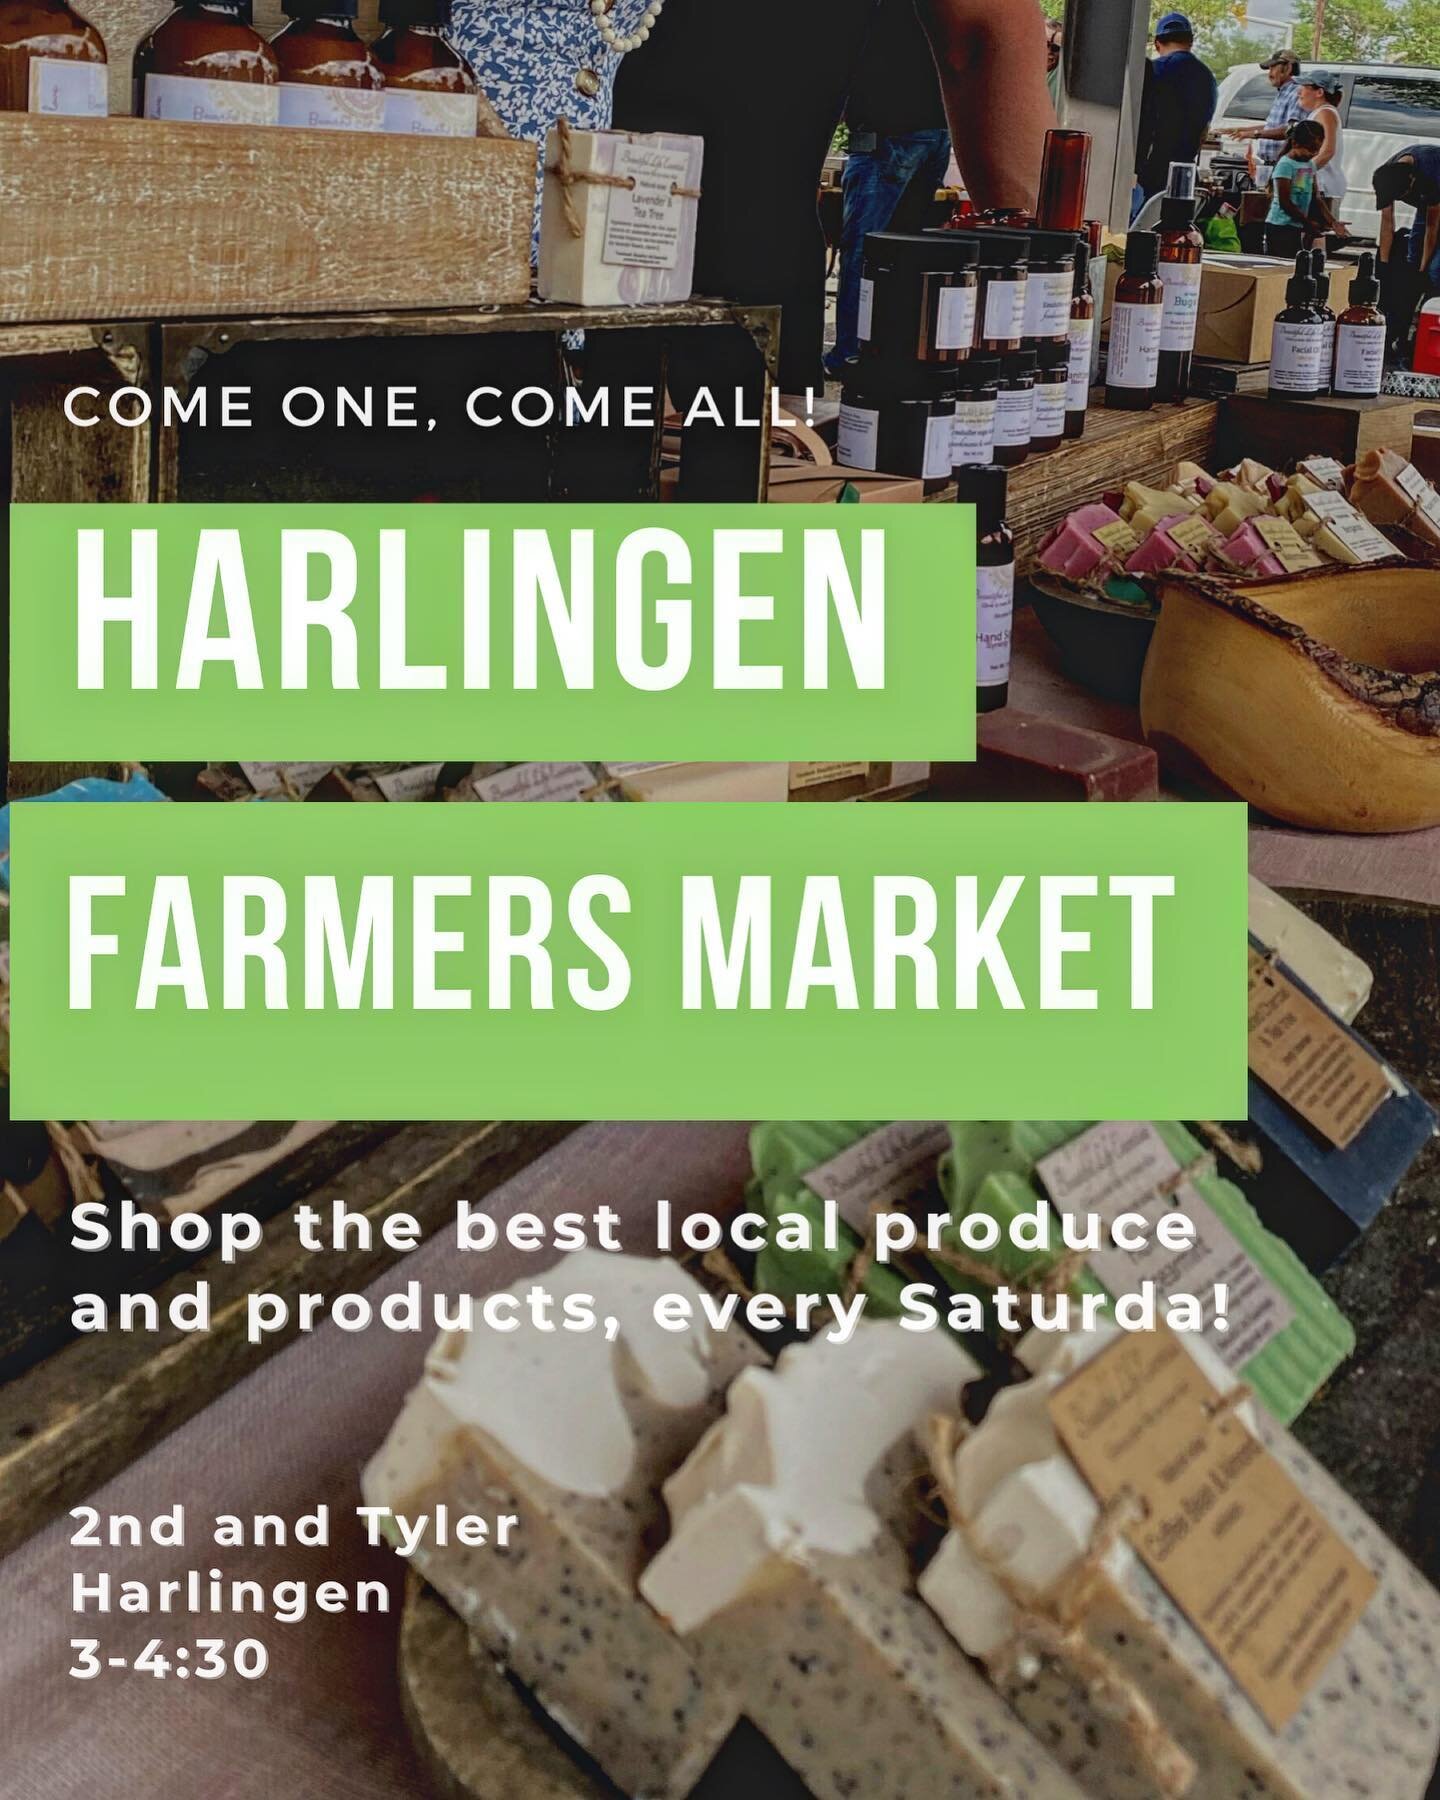 Ready for the Harlingen Farmers Market! Get the best harlingen has to offer each Saturday,
2nd and Tyler
3-4:30
##harlingen #harlingencvb #local #farmersmarket #farmers